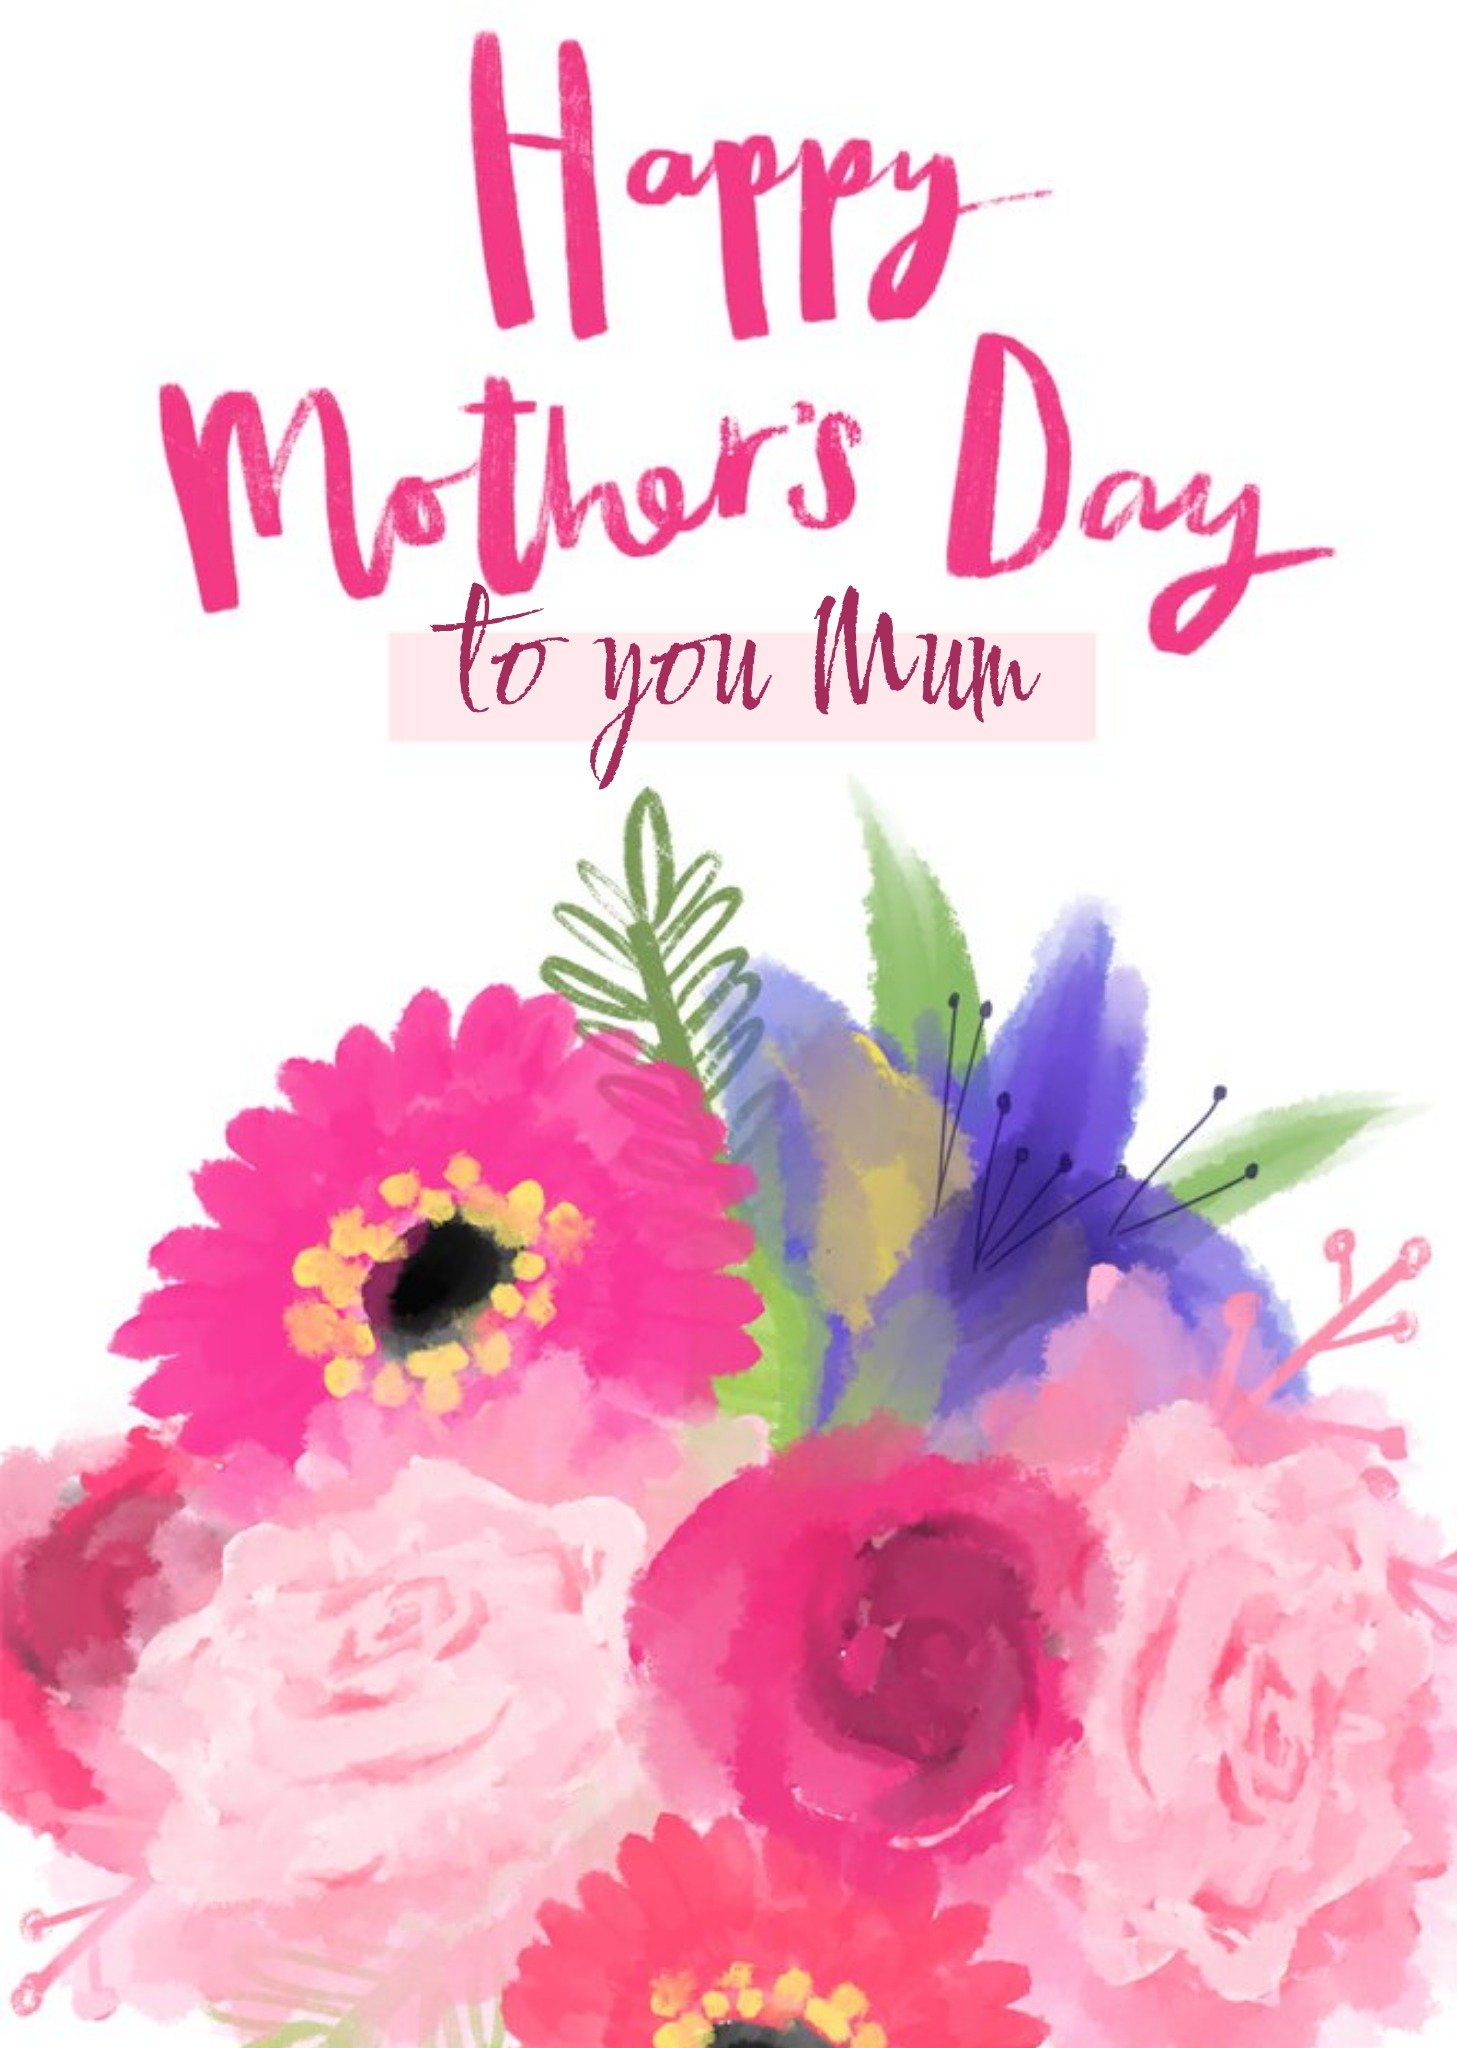 Moonpig Bright Pink Watercolour Flowers Happy Mother's Day Card Ecard